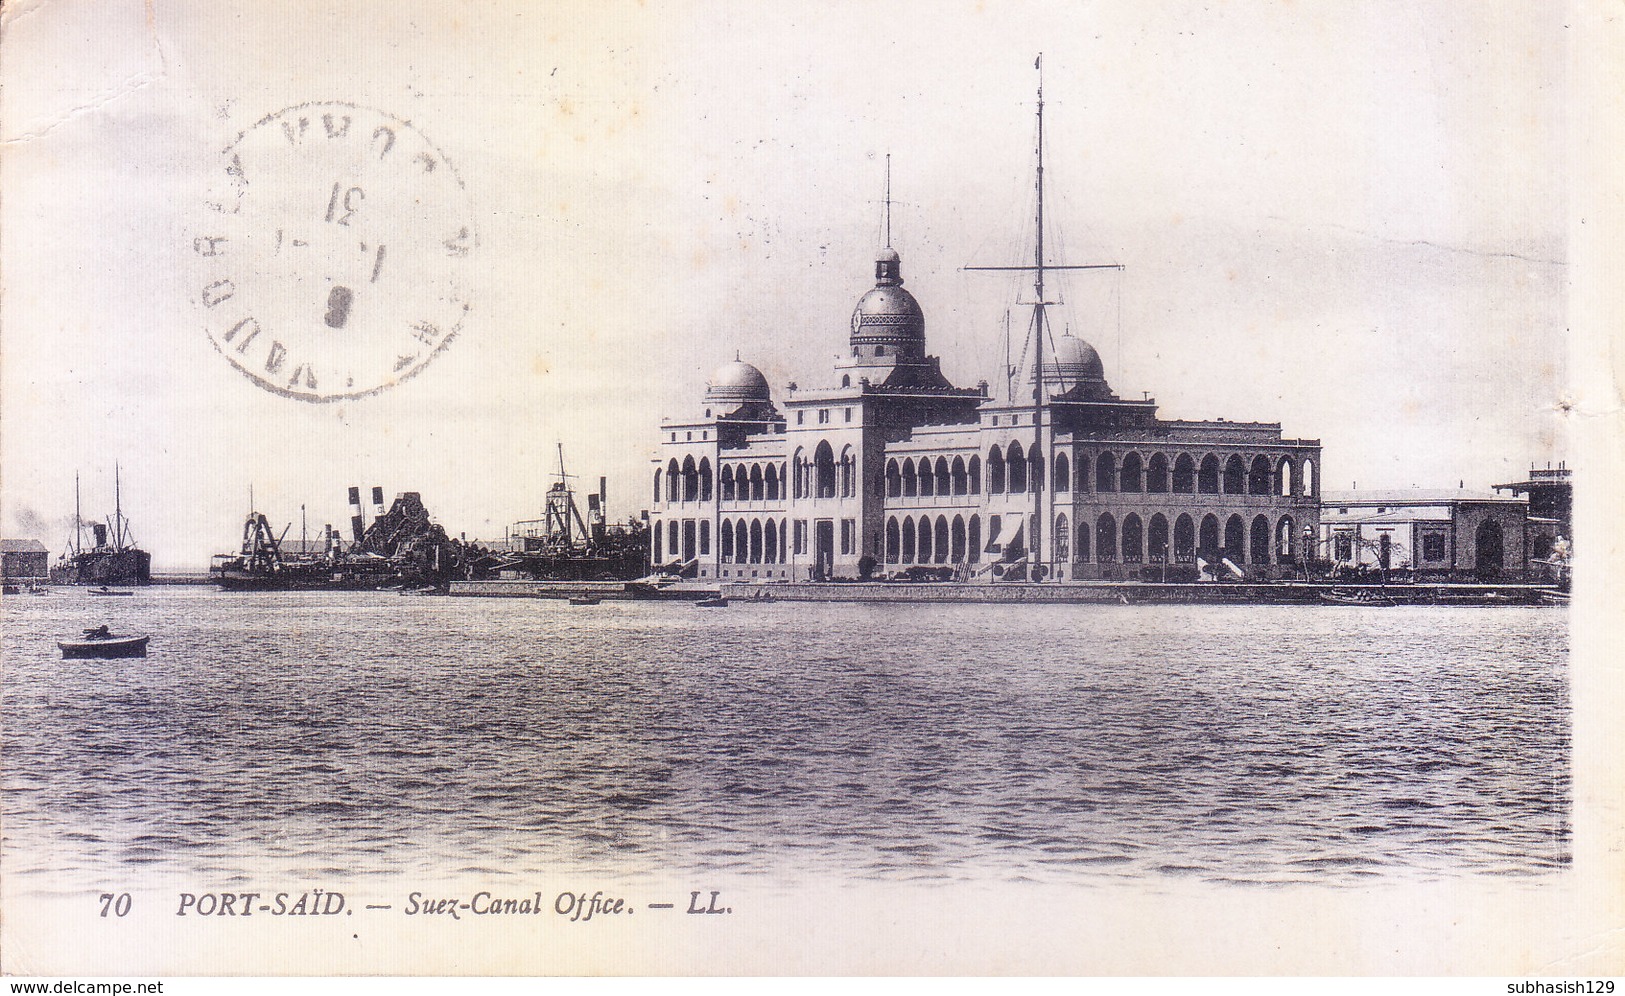 EGYPT : VINTAGE BLACK & WHITE PICTURE POST CARD : PORT SAID, SUEZ CANAL OFFICE : YEAR 1931 : POSTED FOR FRANCE - Covers & Documents